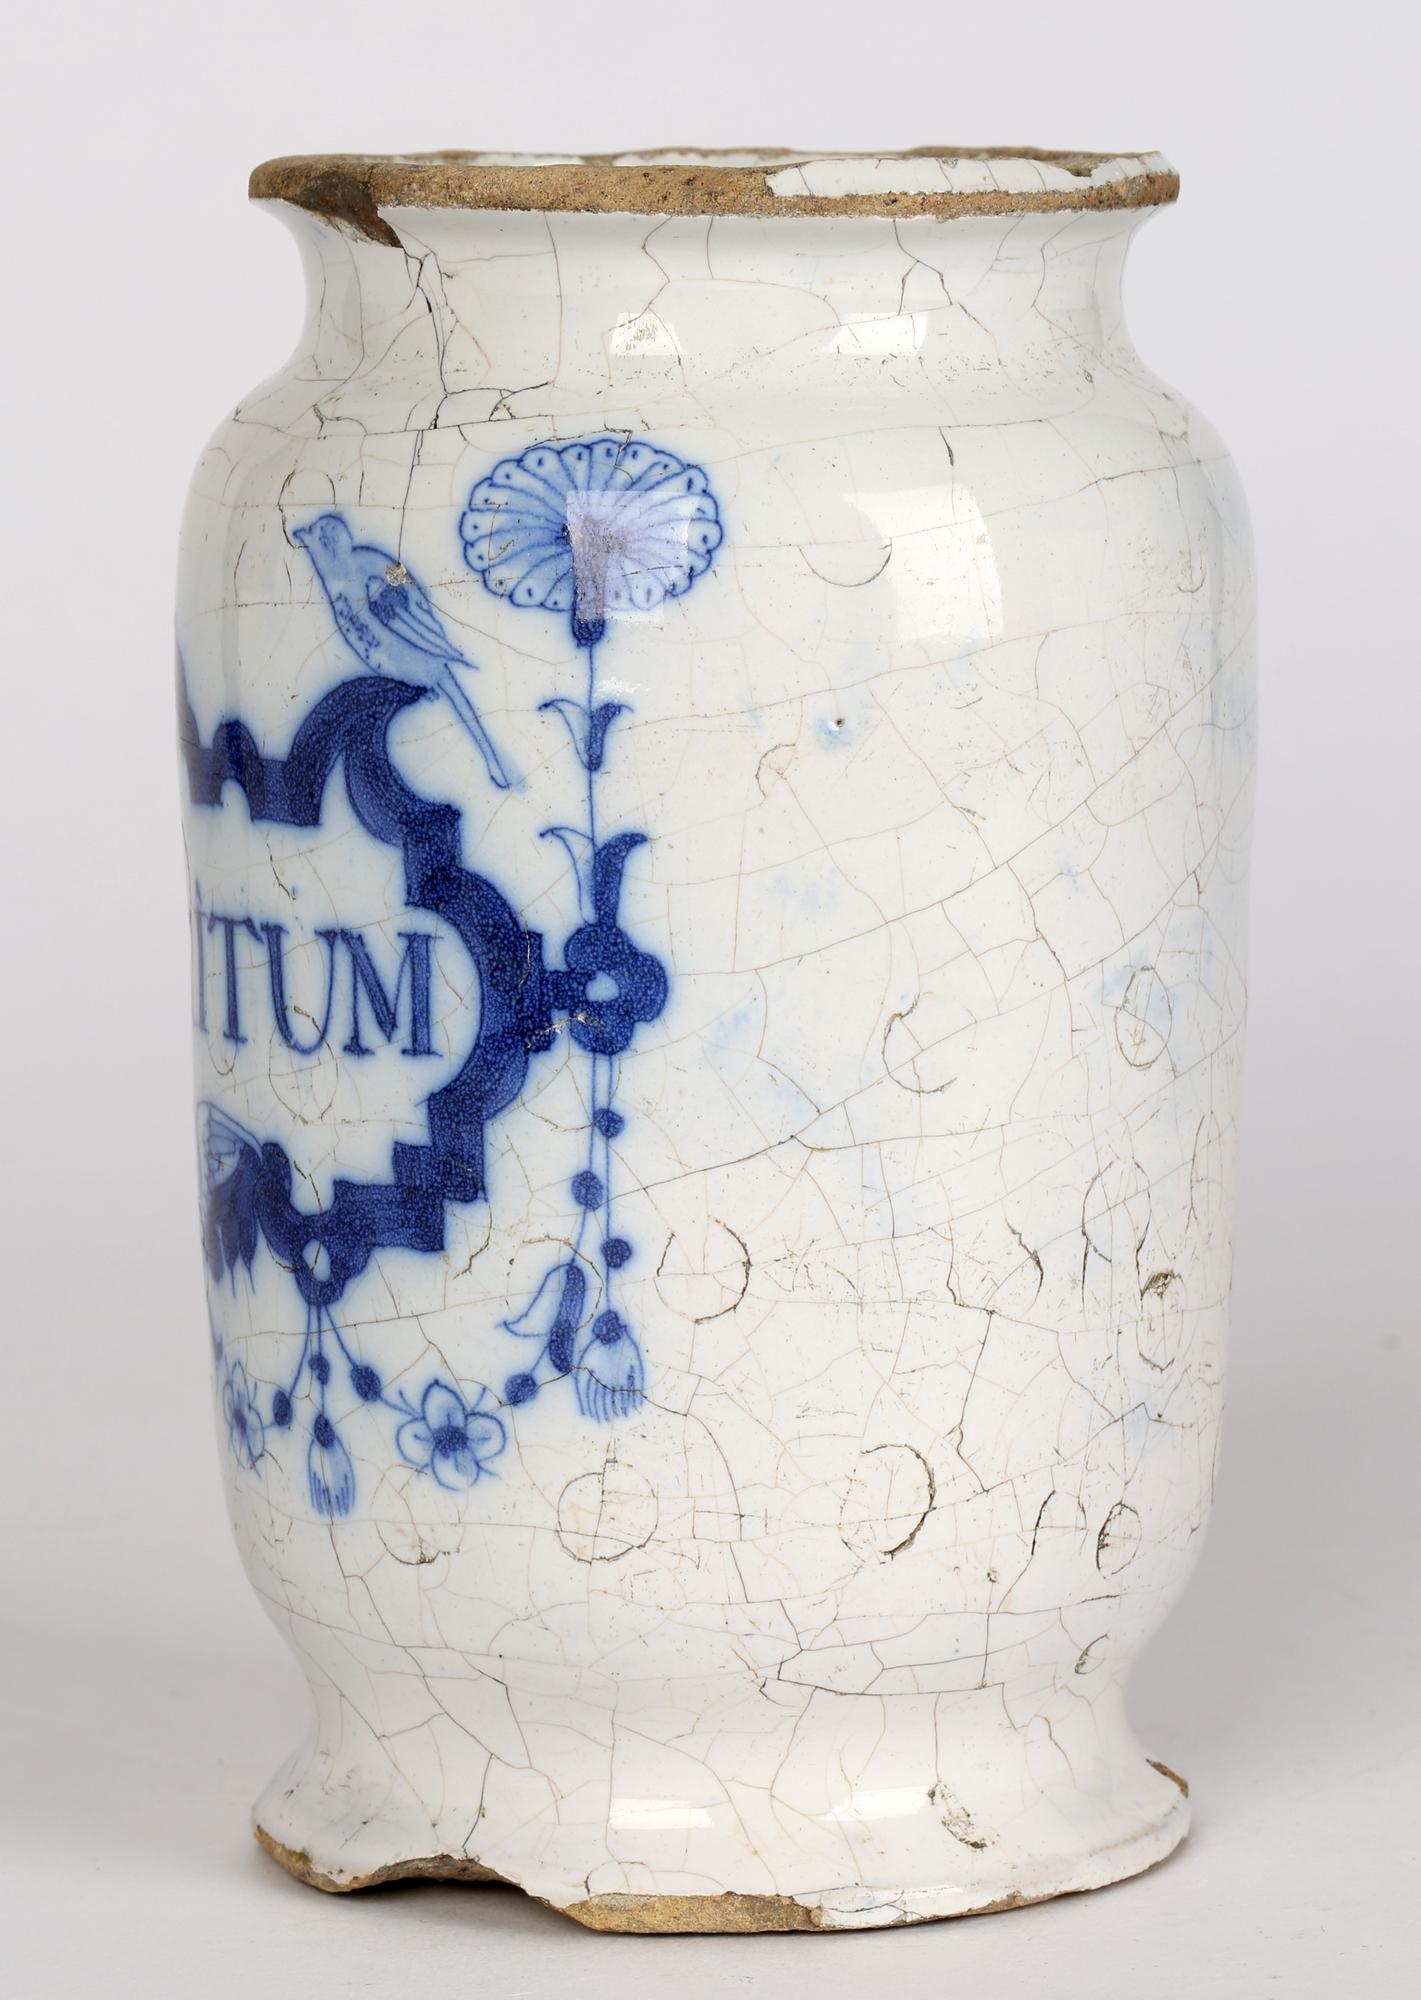 Delft Pottery Early 18th Century Apothecary Jar Marked Nutritum 6